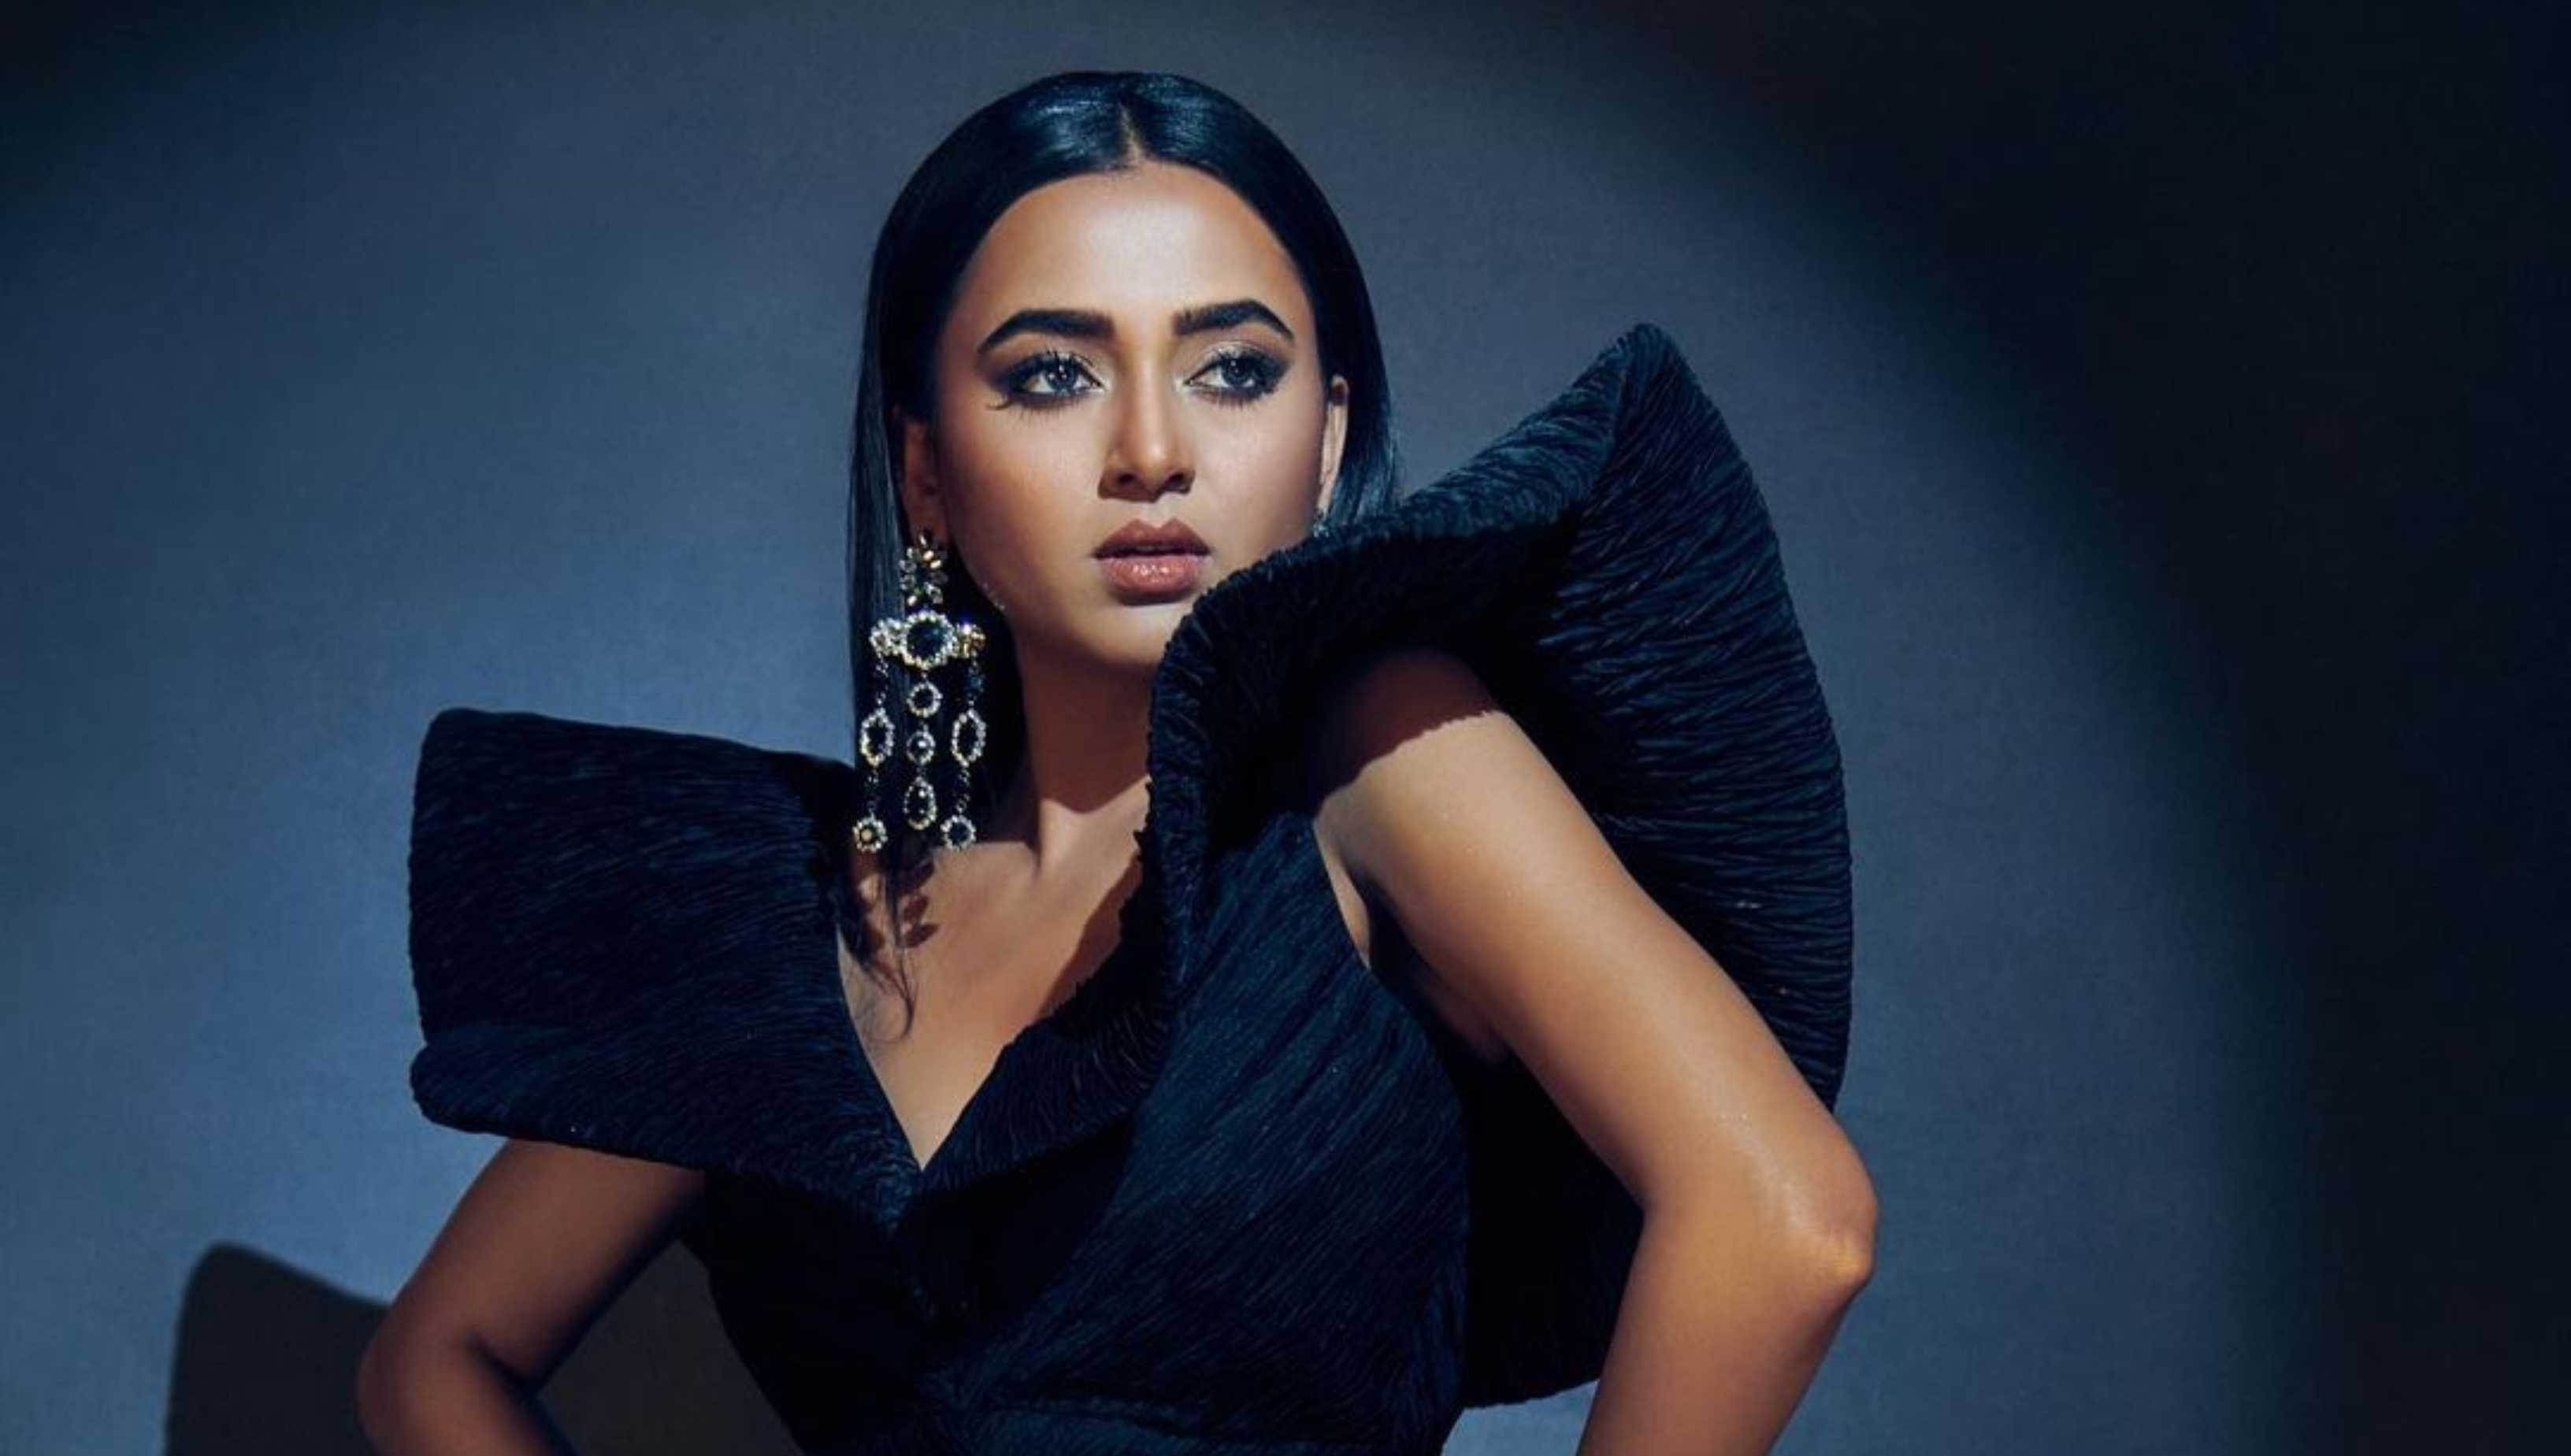 Naagin 6 star Tejasswi Prakash remembers being skinny shamed and called a ‘hanger’ during school